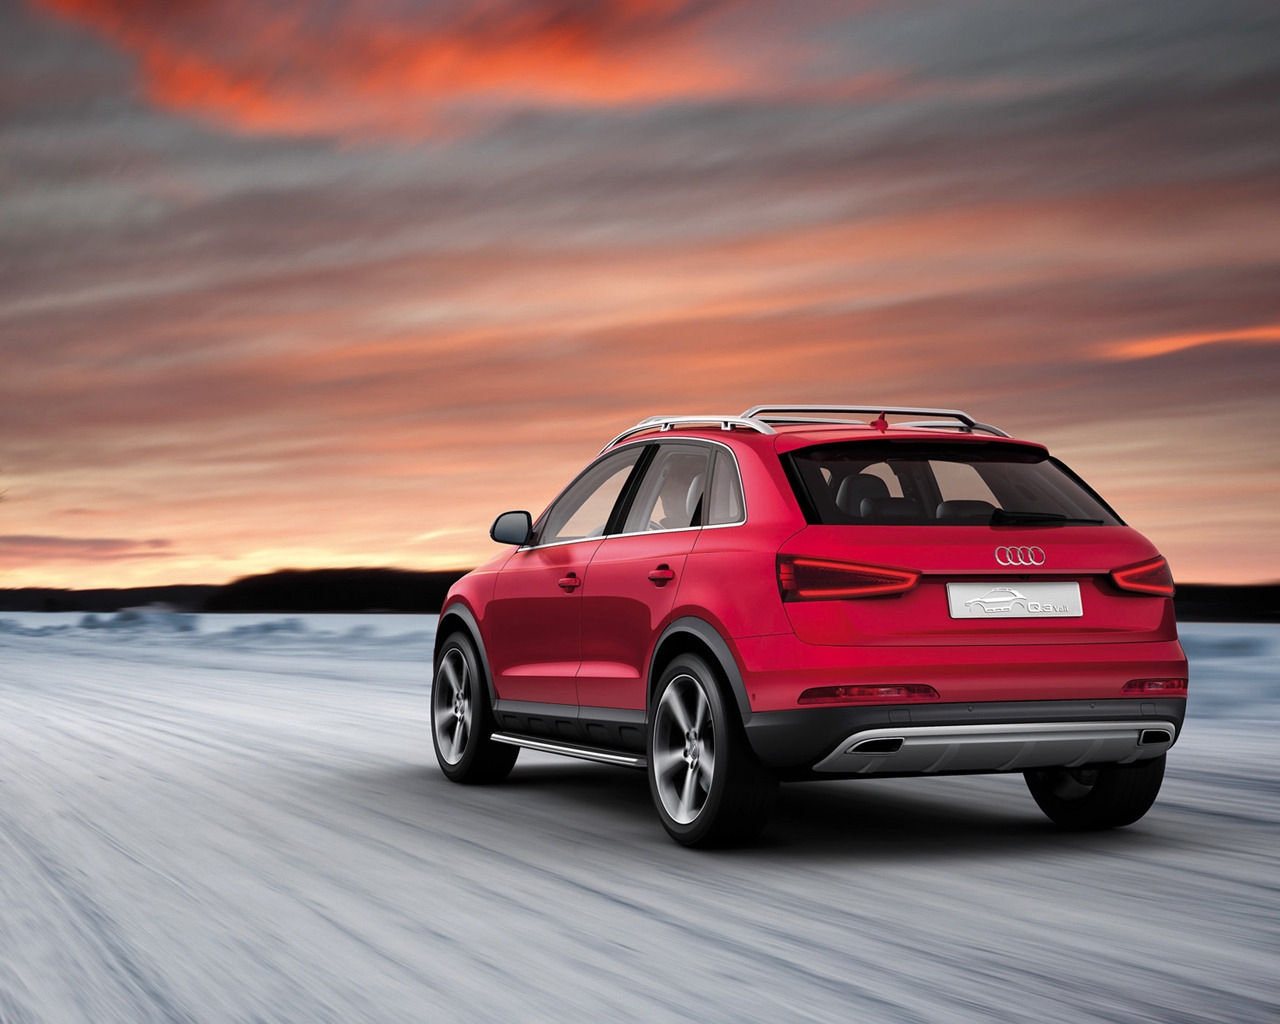 2012 Audi Q3 Vail Rear for 1280 x 1024 resolution